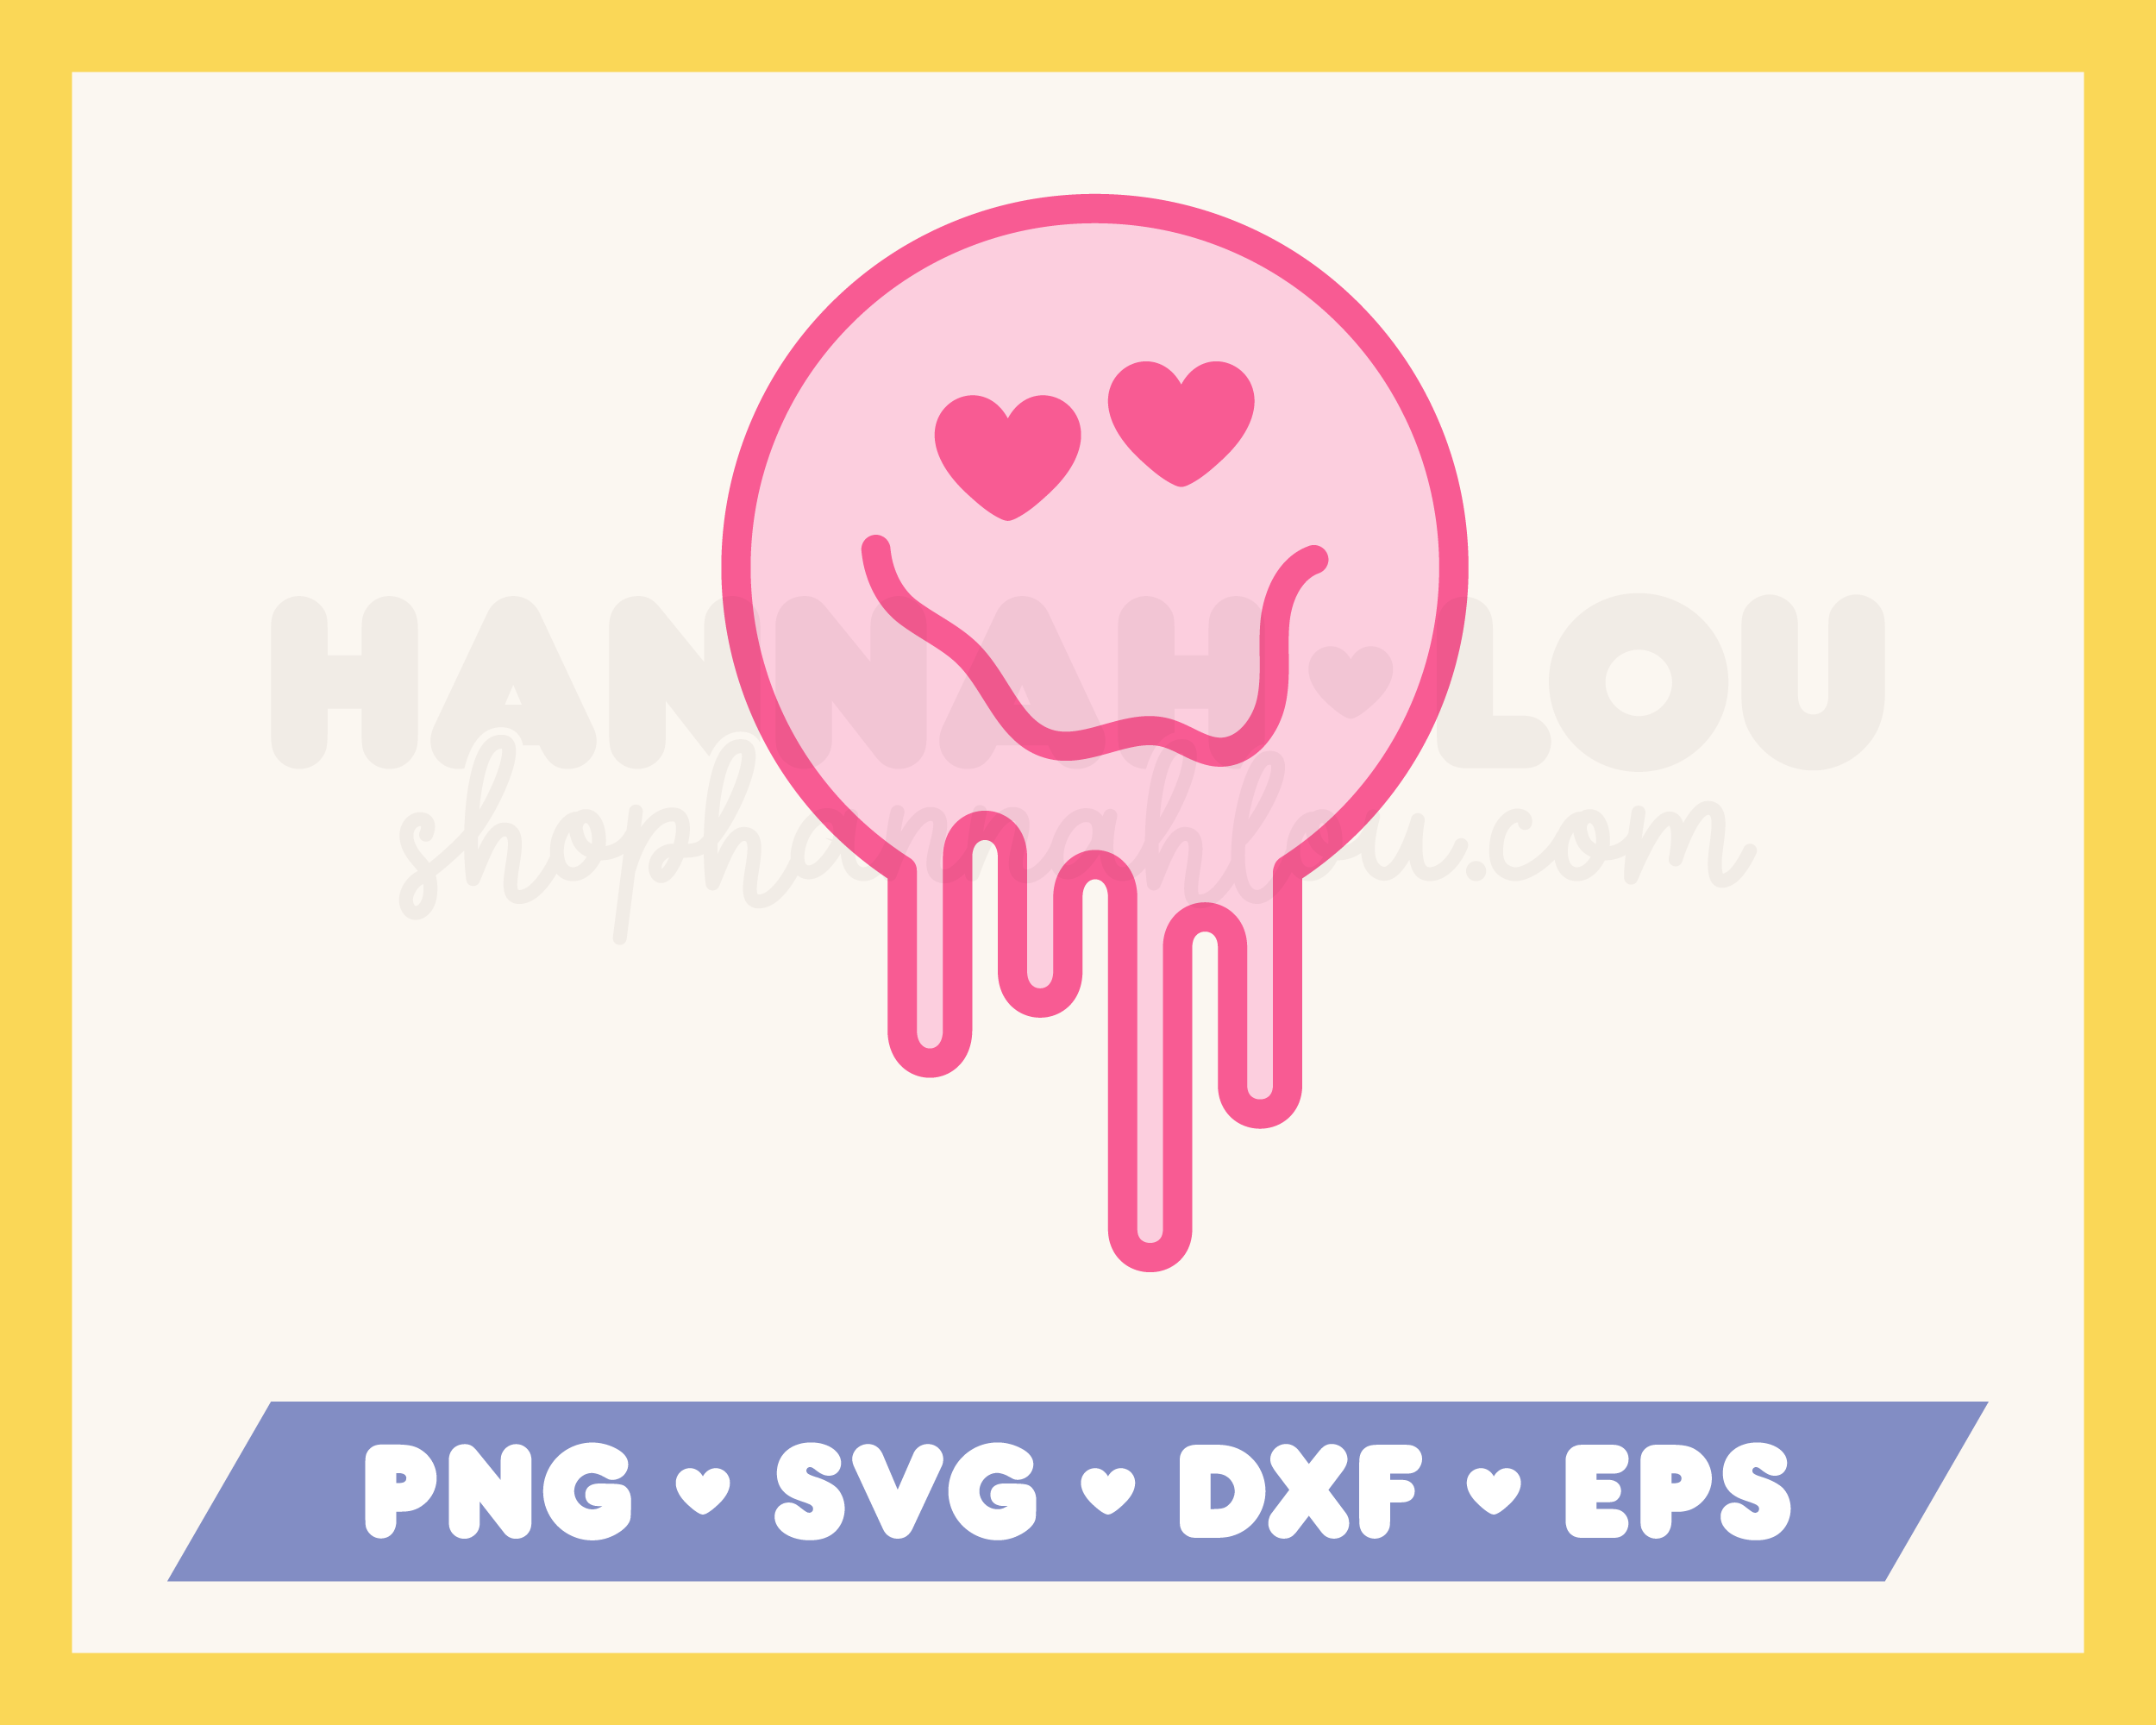 Smiley Melted Face With Heart Eyes SVG Digital Download